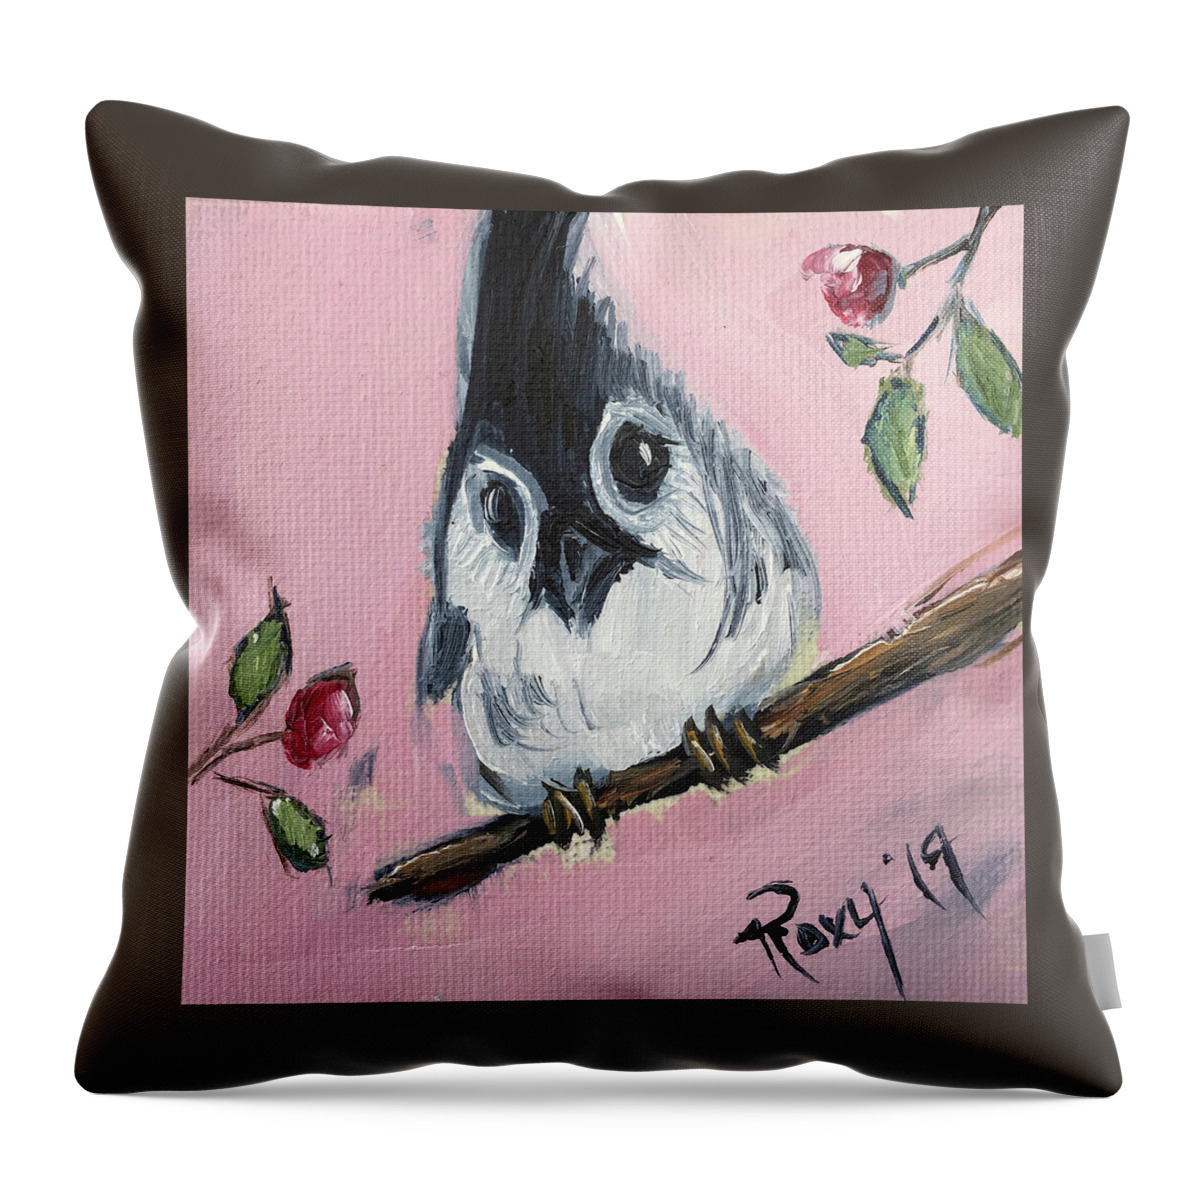 Titmouse Throw Pillow featuring the painting Baby Tufted Tit Mouse by Roxy Rich